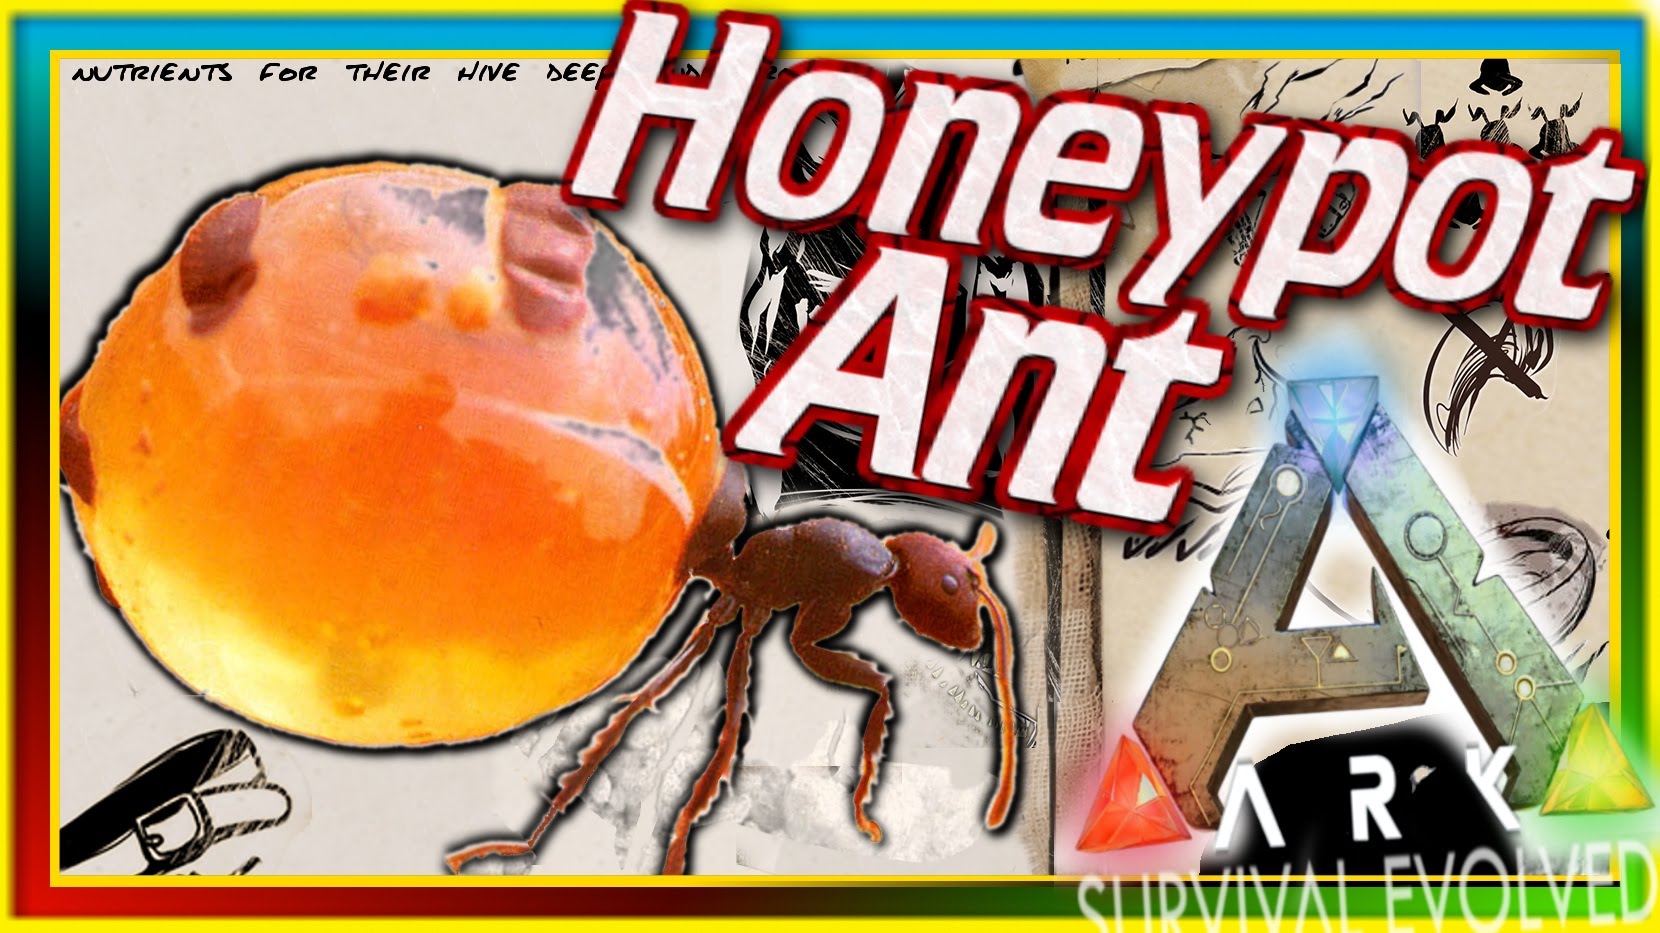 honeypot ant youtube video by Xylophoney